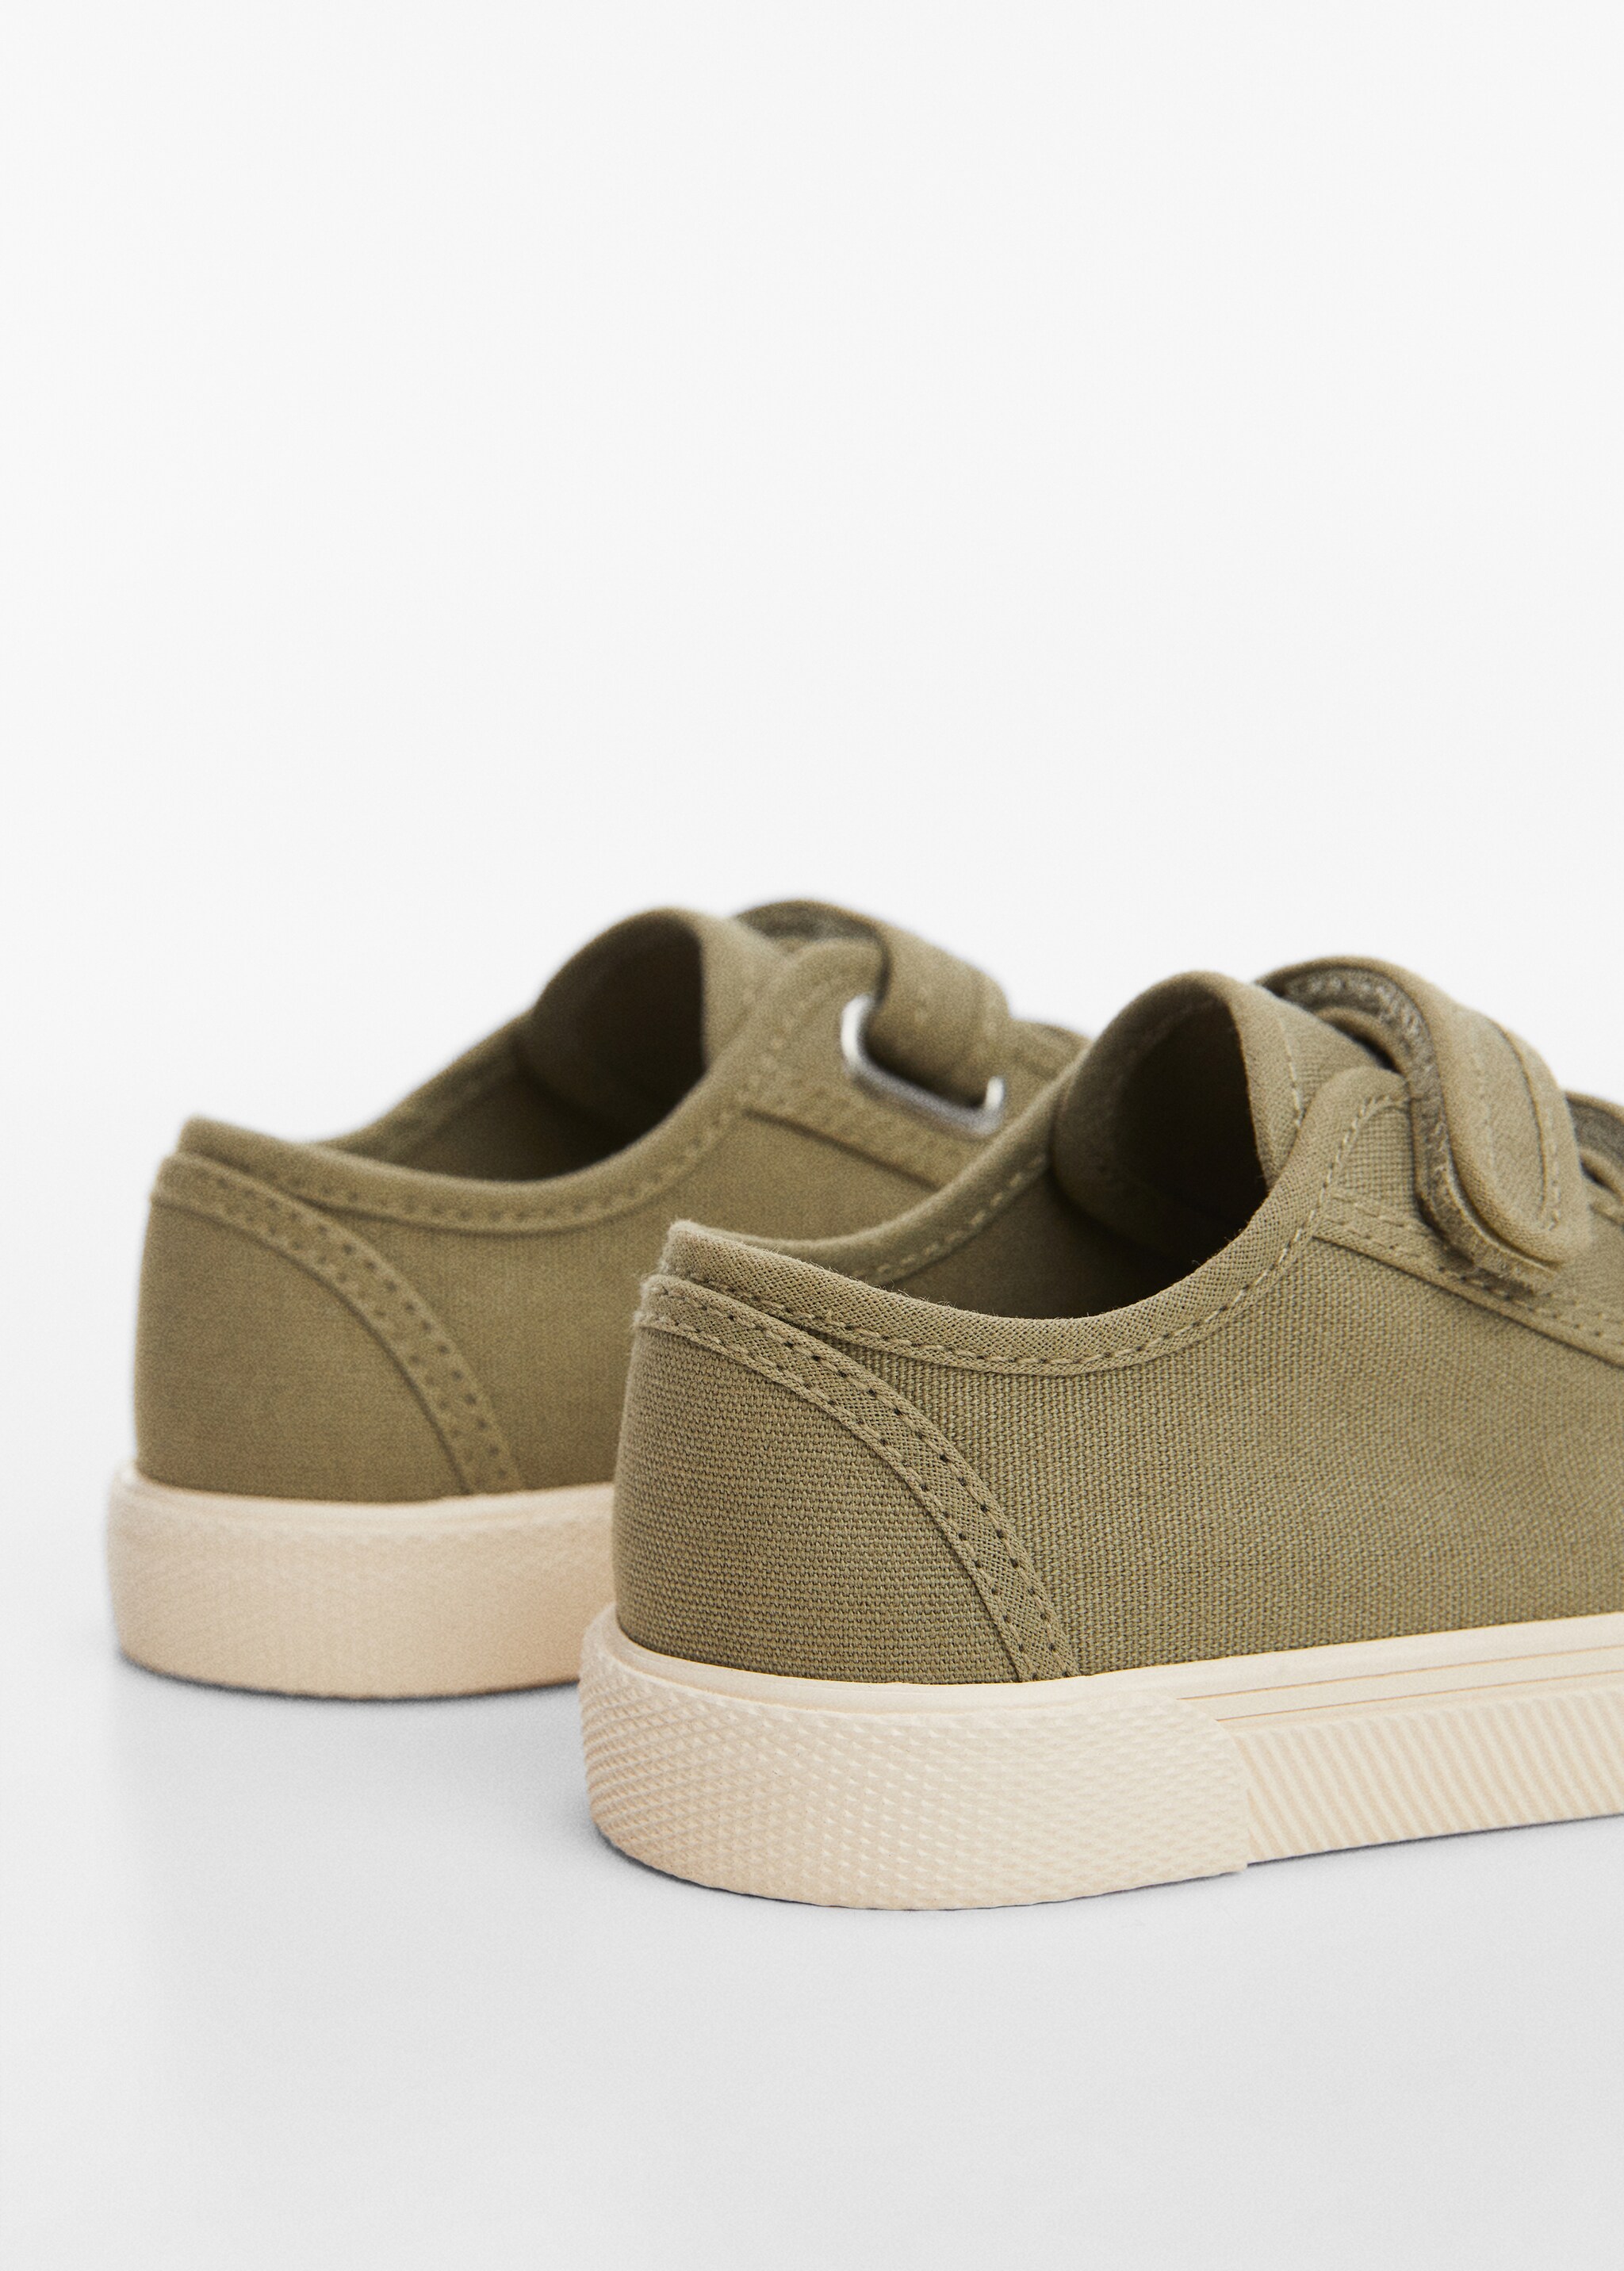 Velcro fastening sneakers - Details of the article 1